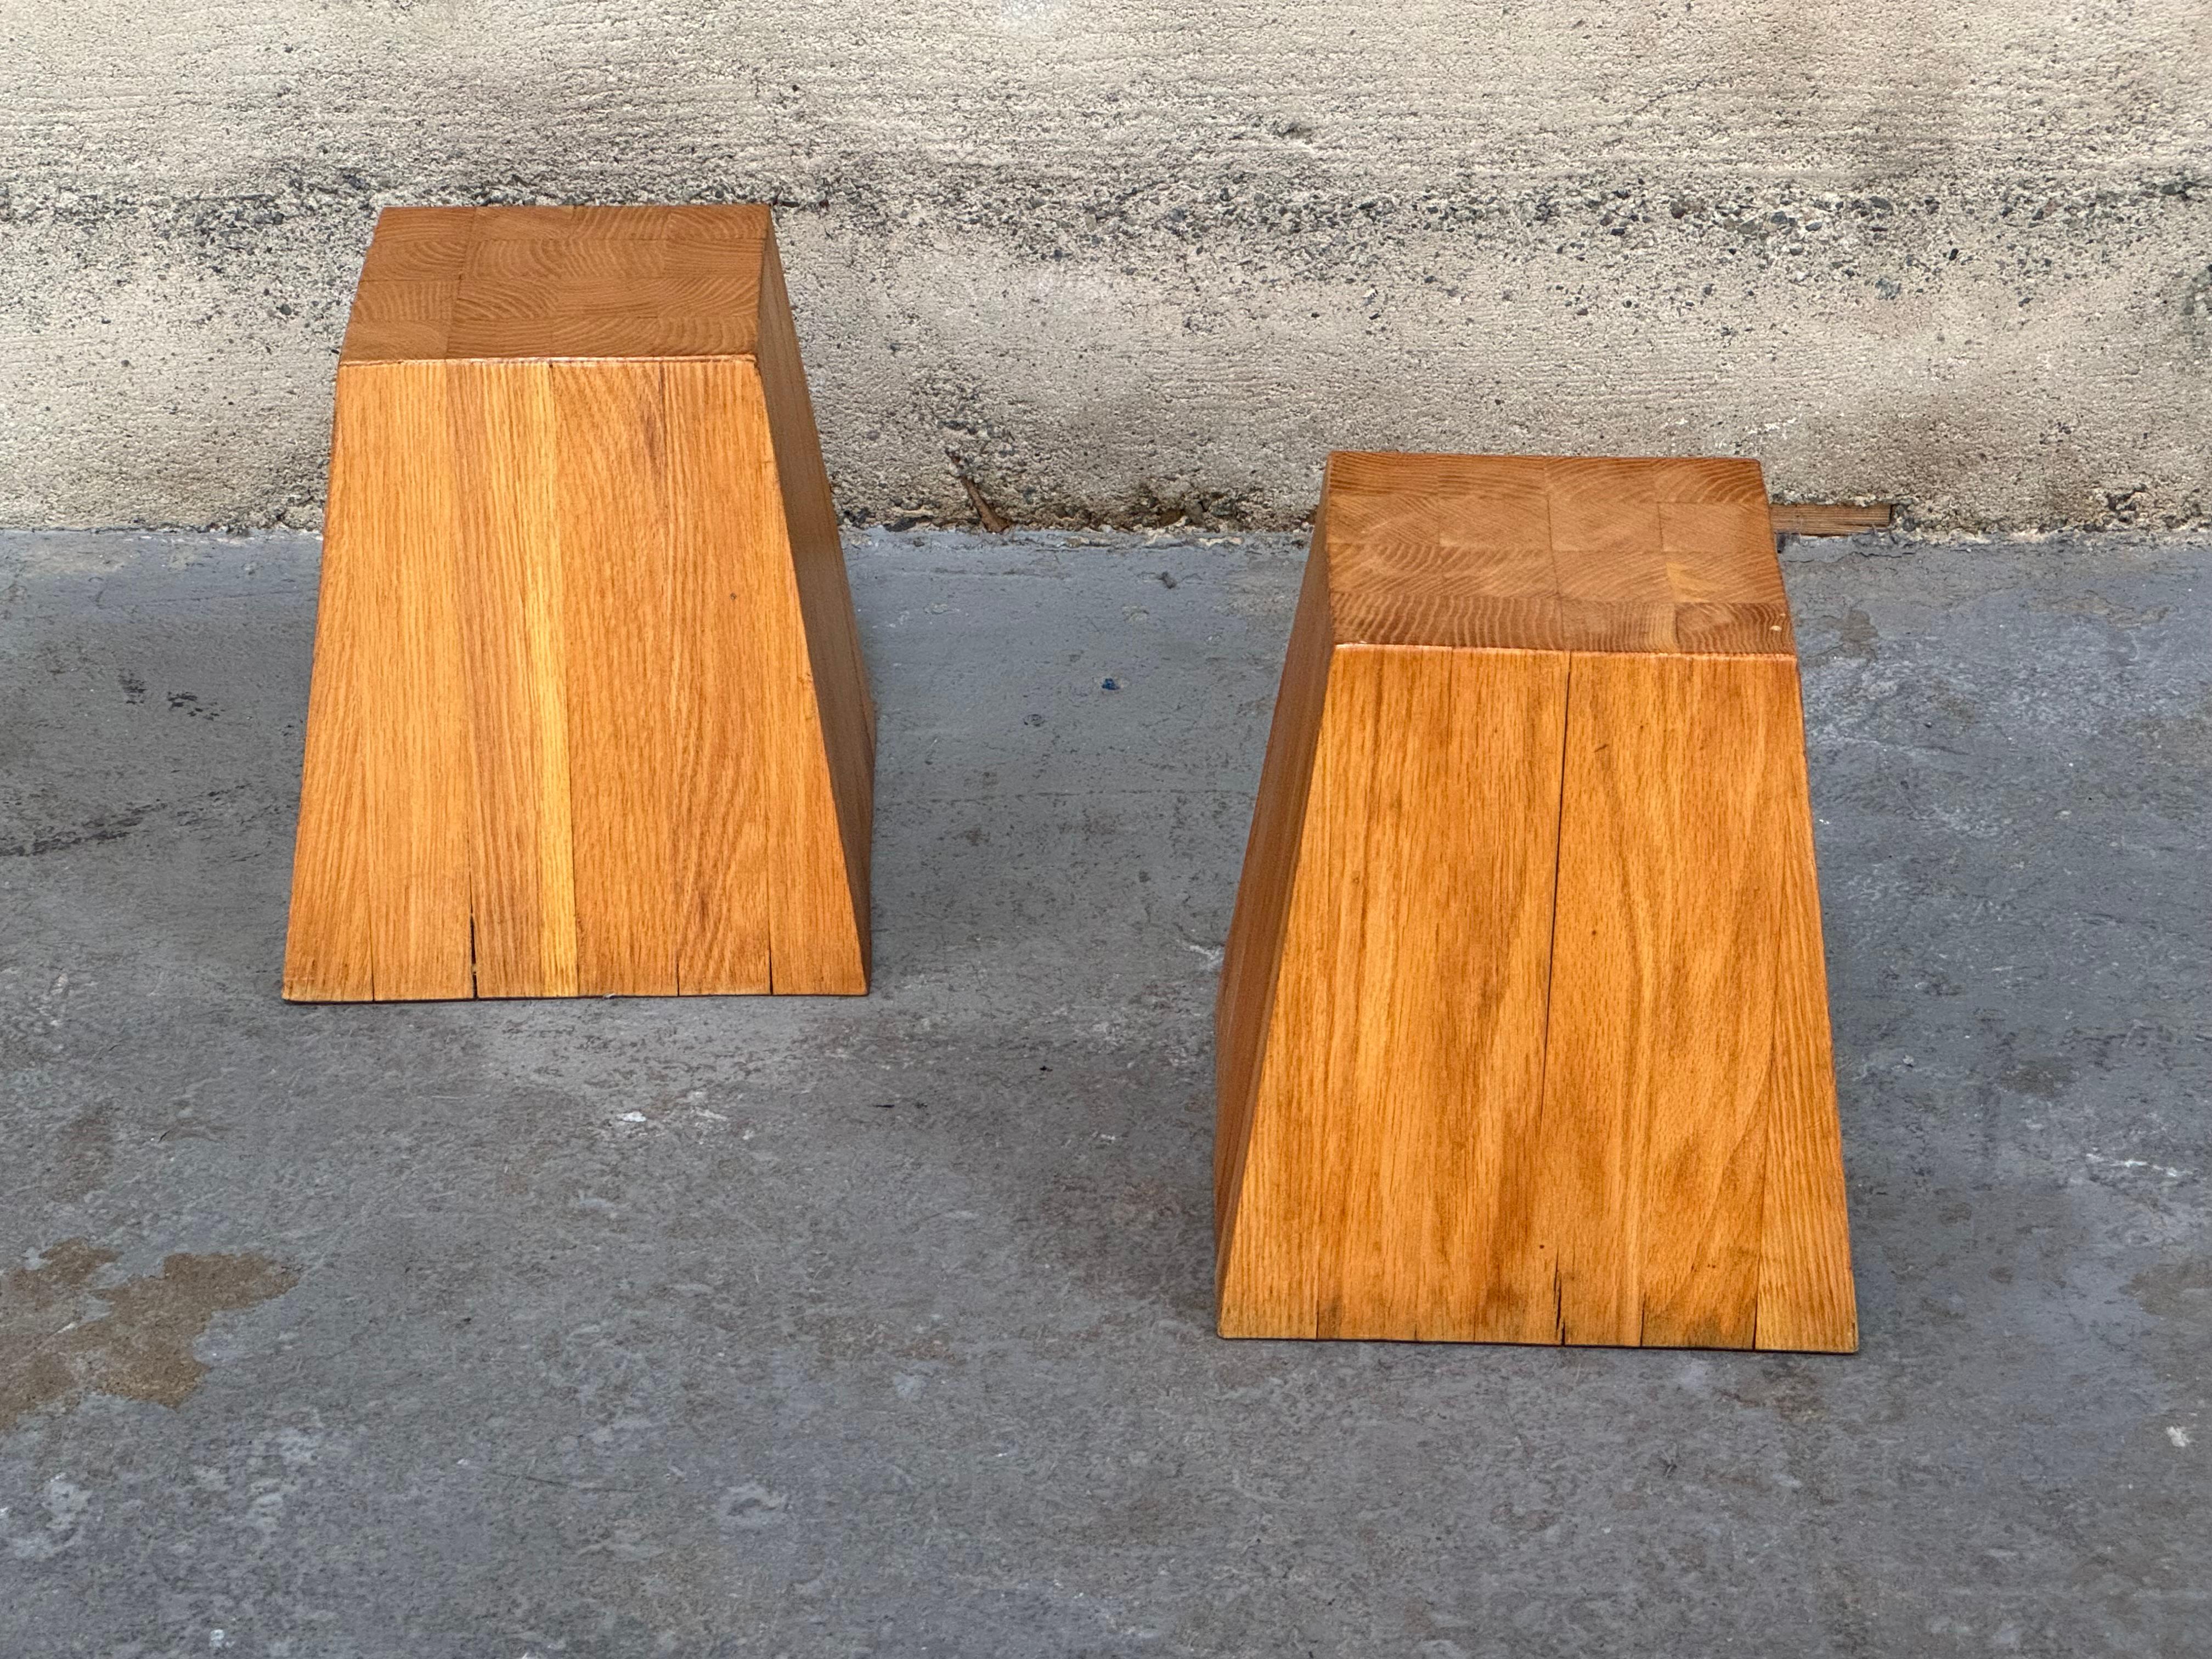 Late 20th Century Solid Elm Side Tables / Pedestals from Denmark For Sale